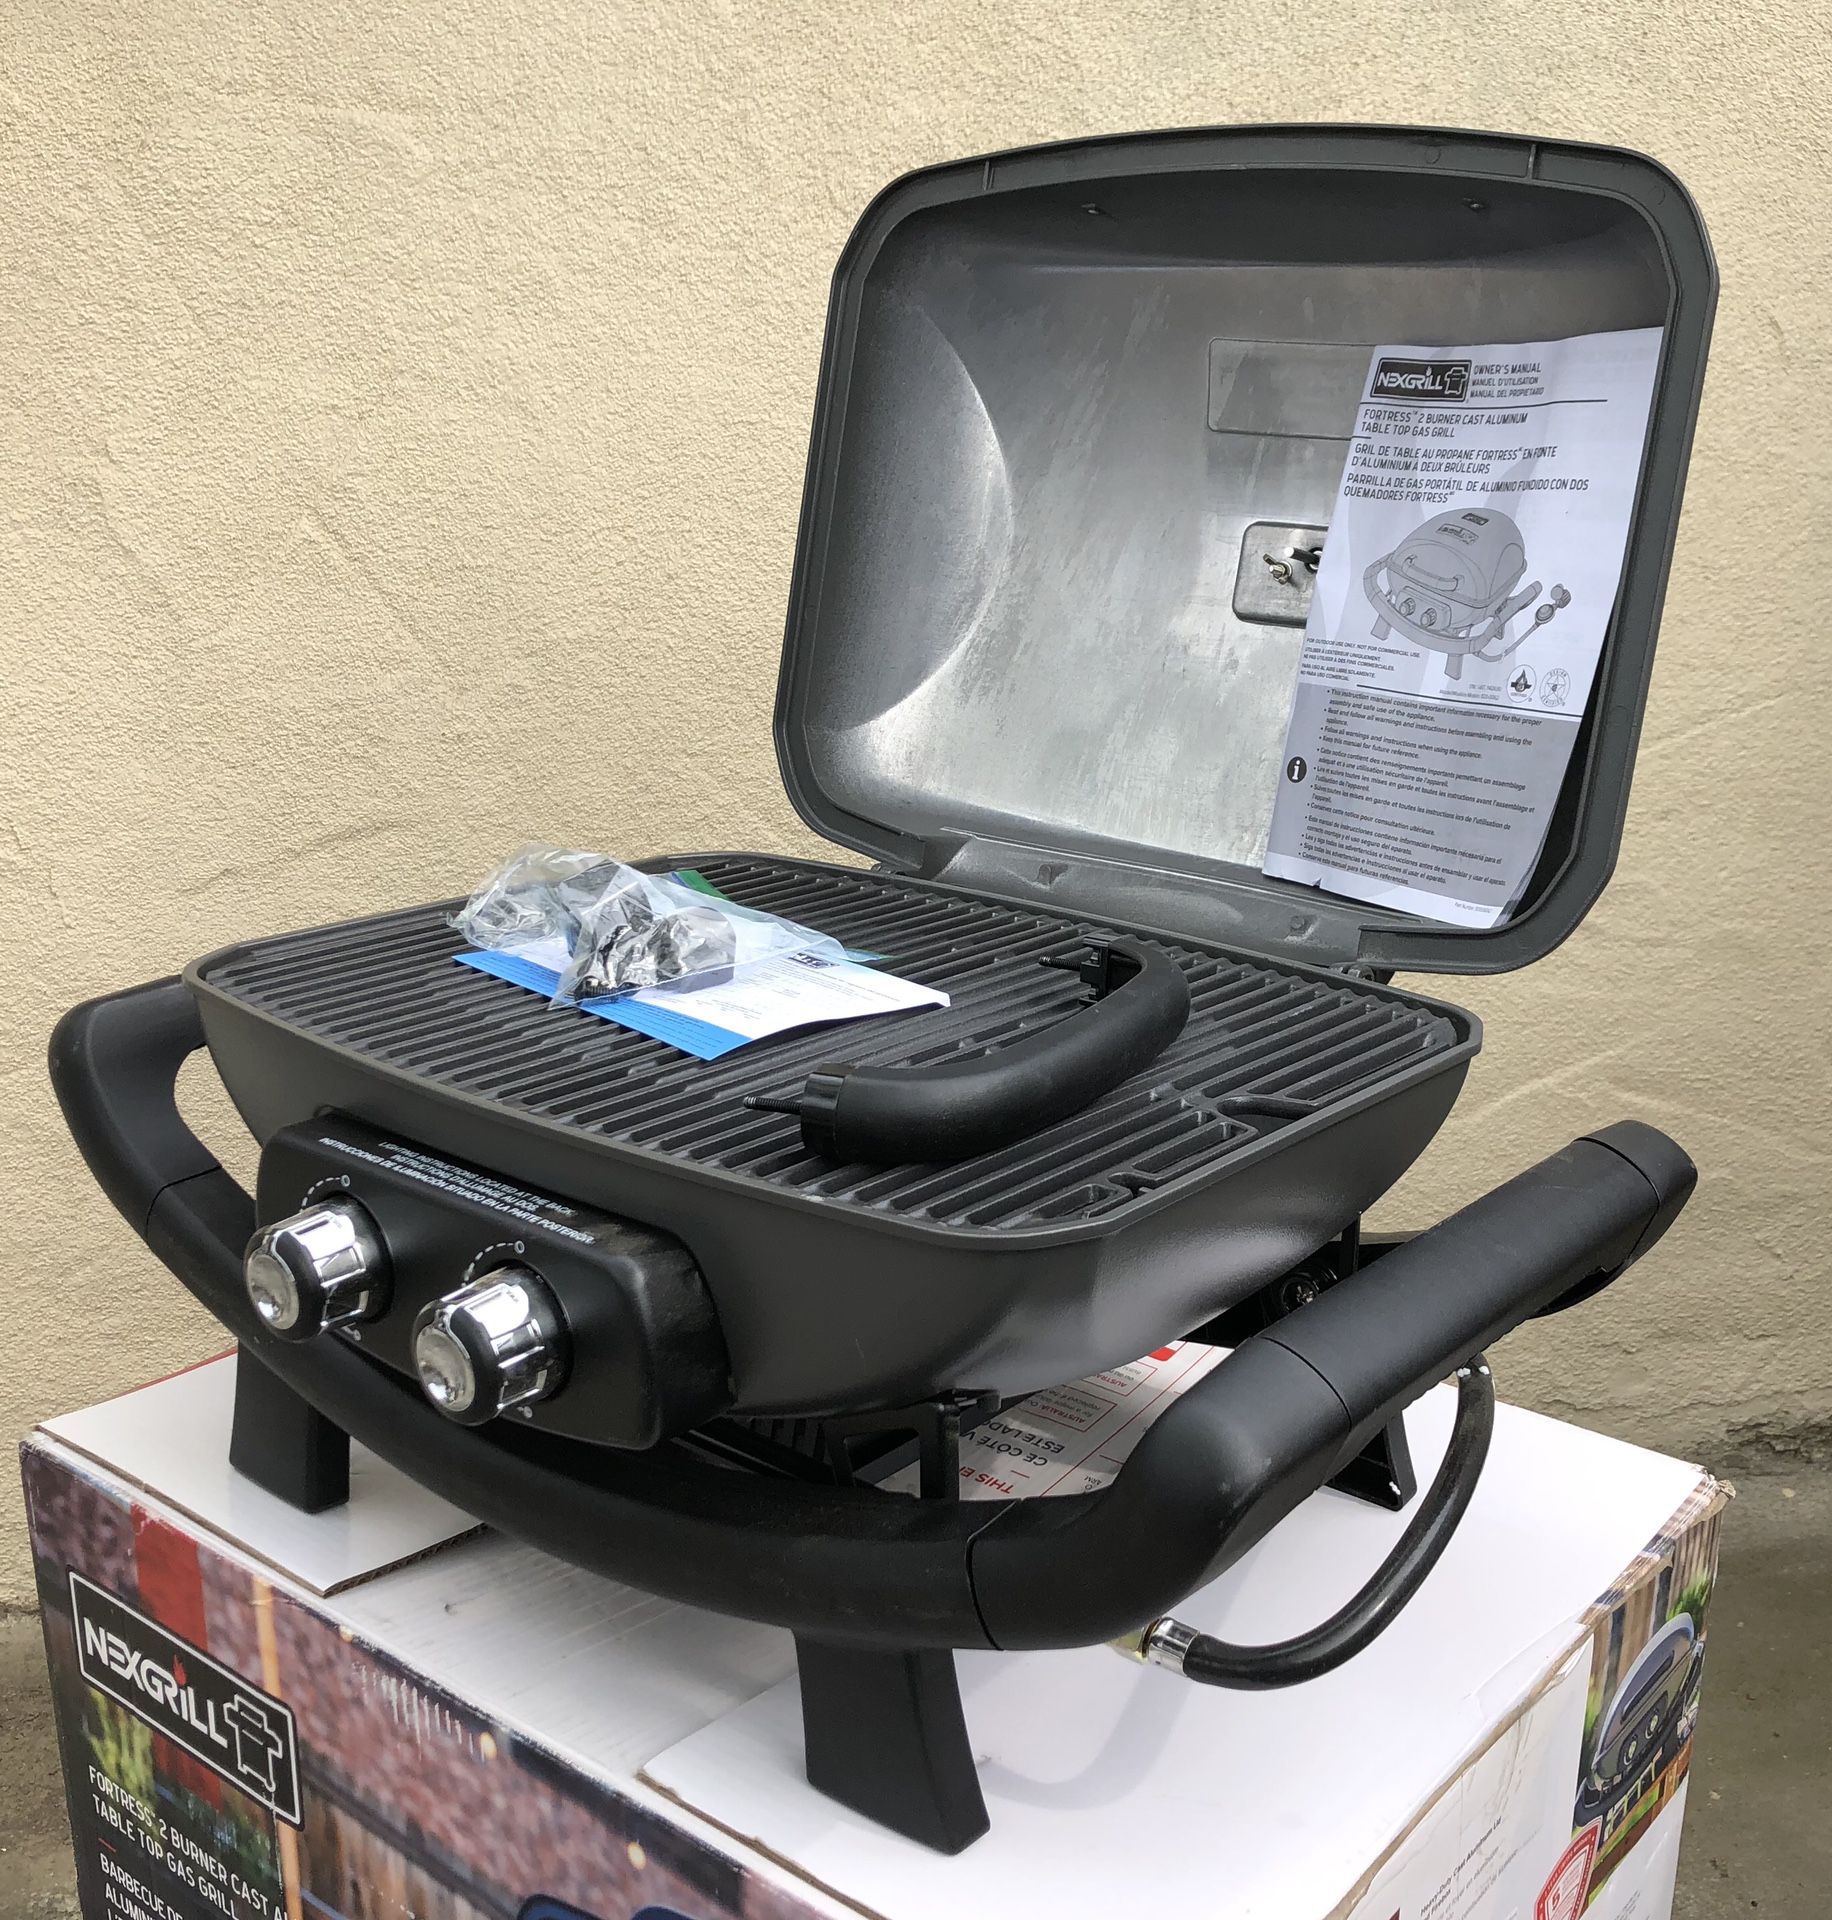 Nexgrill Fortress Table Top Grill Review